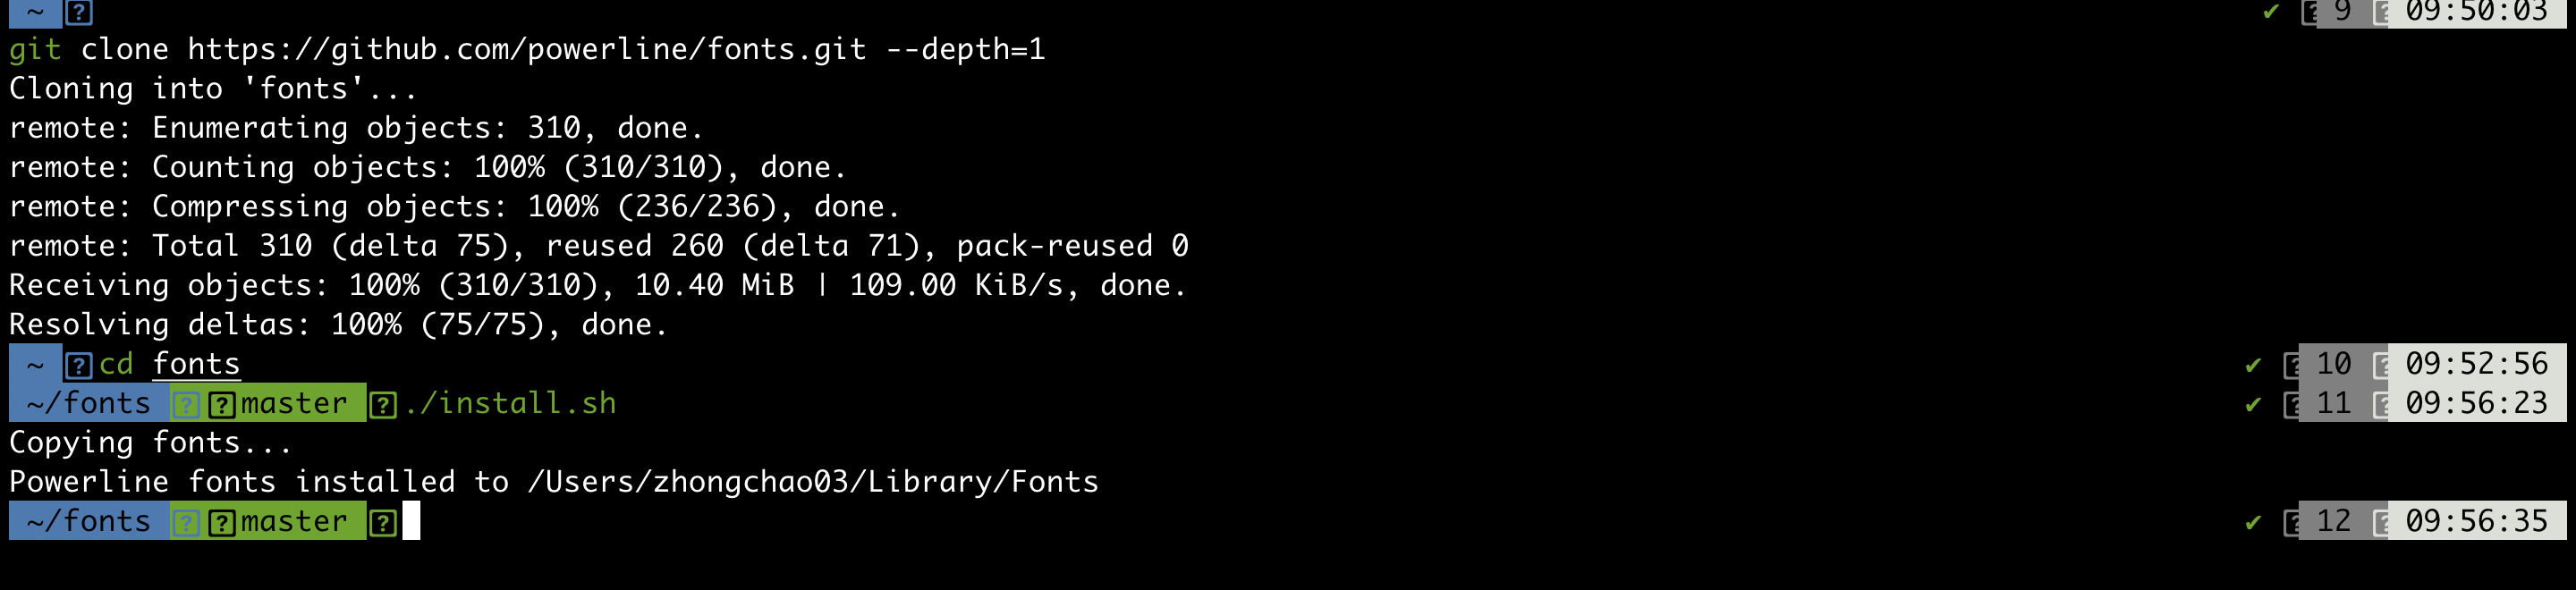 install-fonts.png